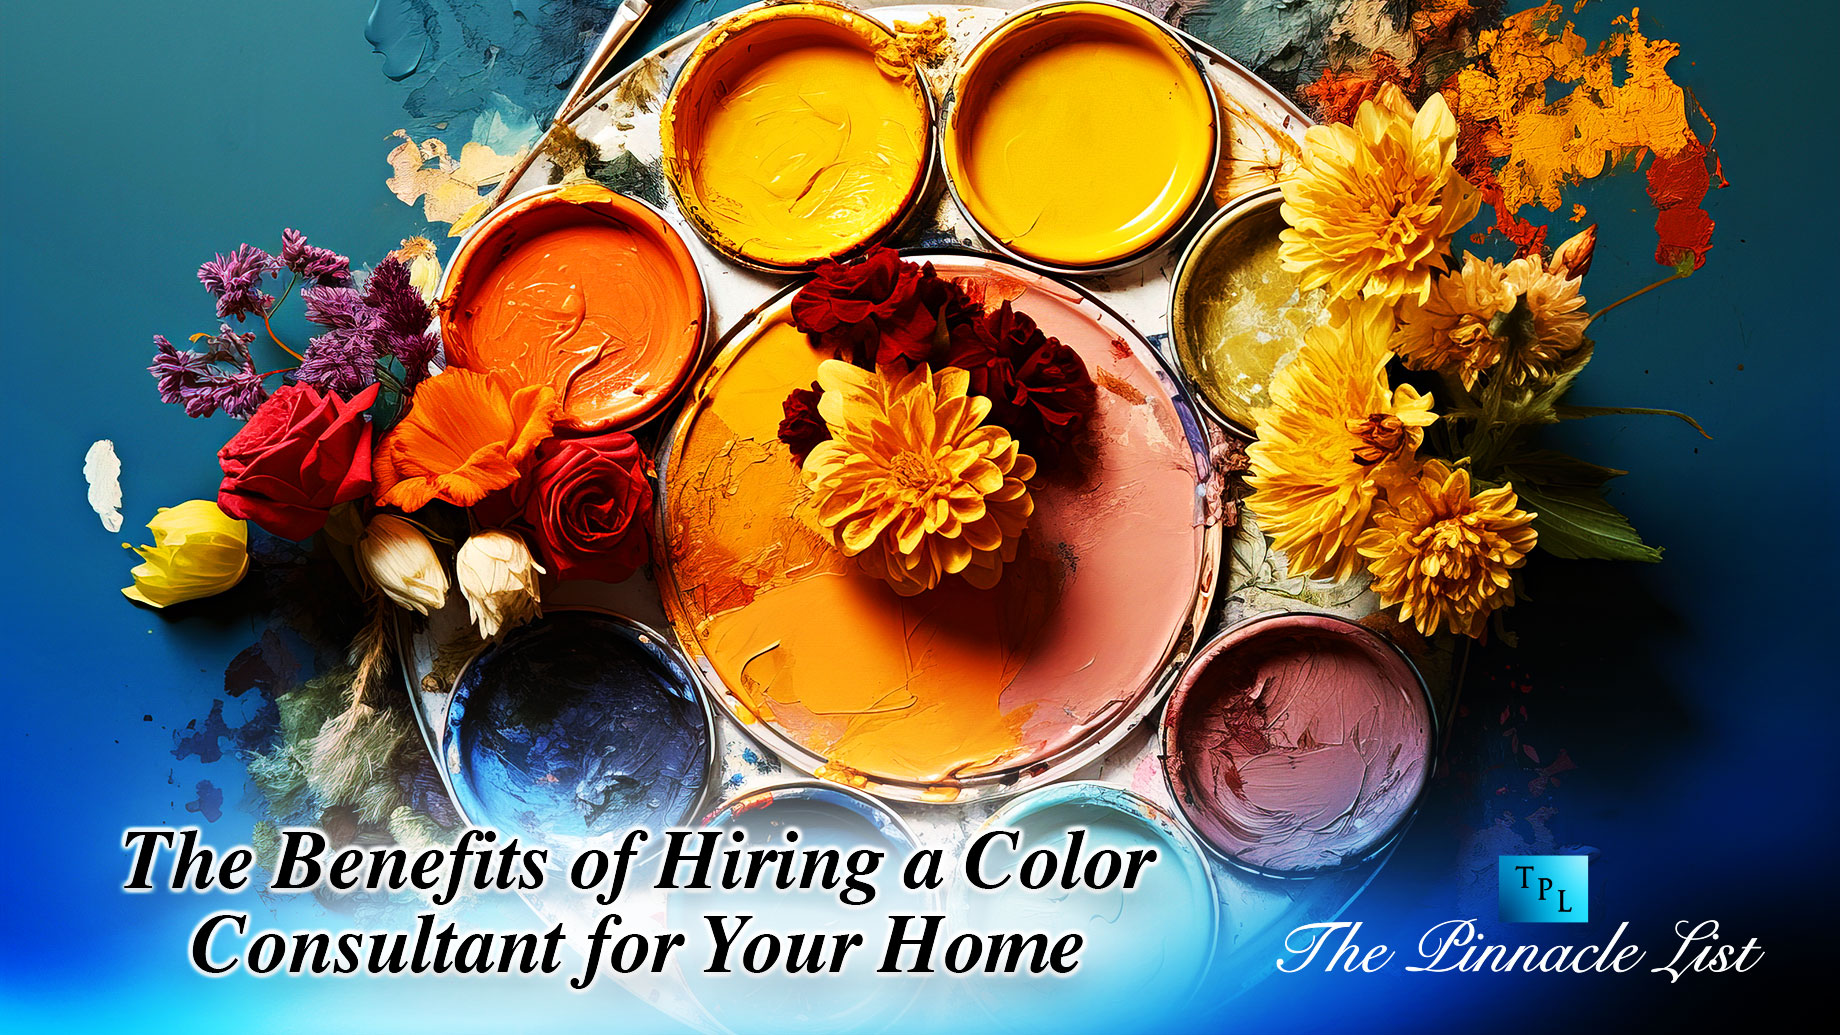 The Benefits of Hiring a Color Consultant for Your Home